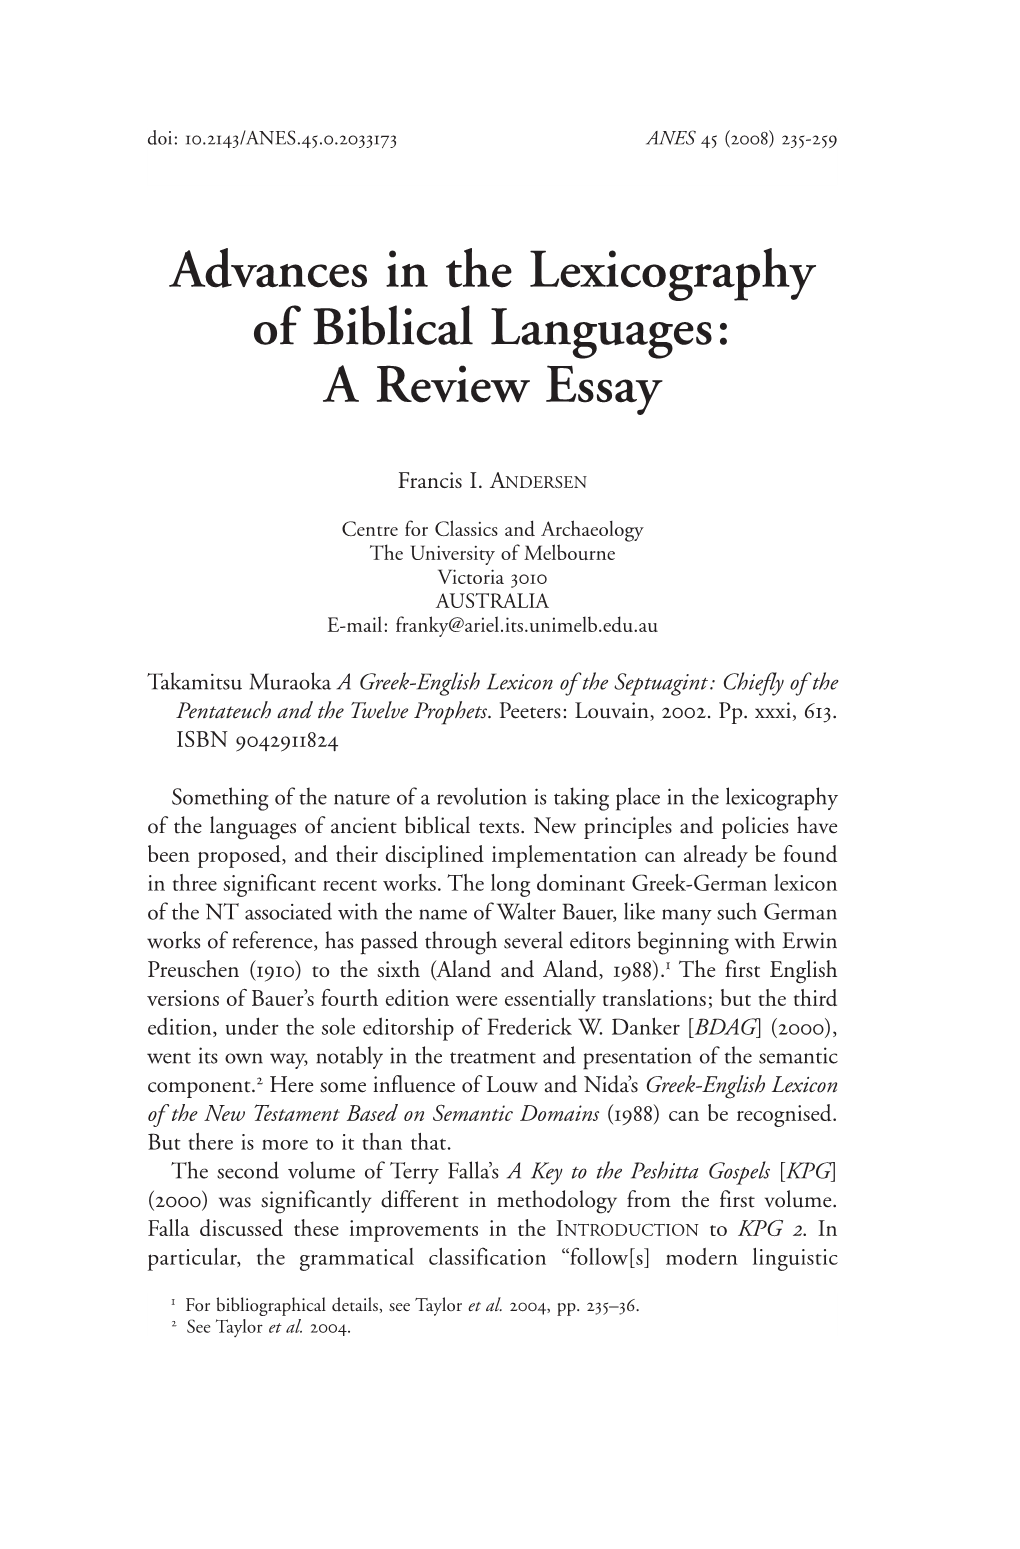 Advances in the Lexicography of Biblical Languages: a Review Essay